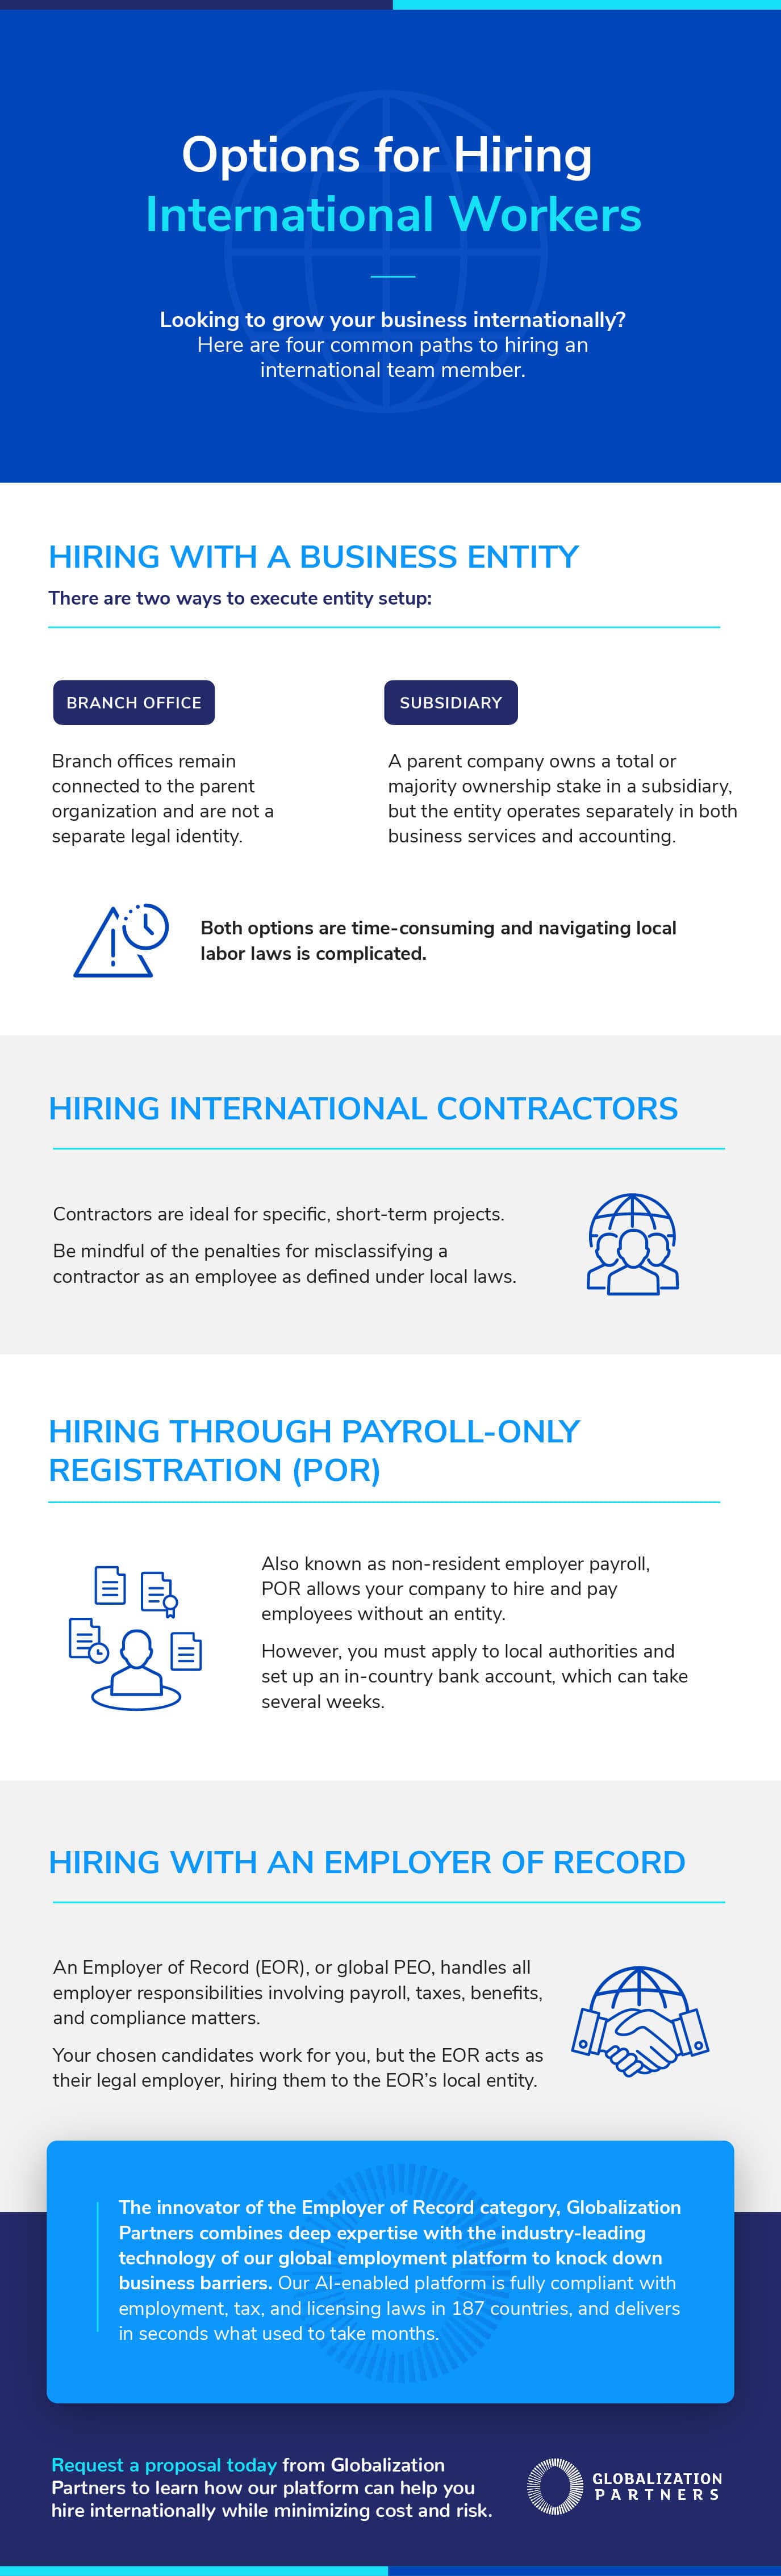 Options for Hiring International Workers